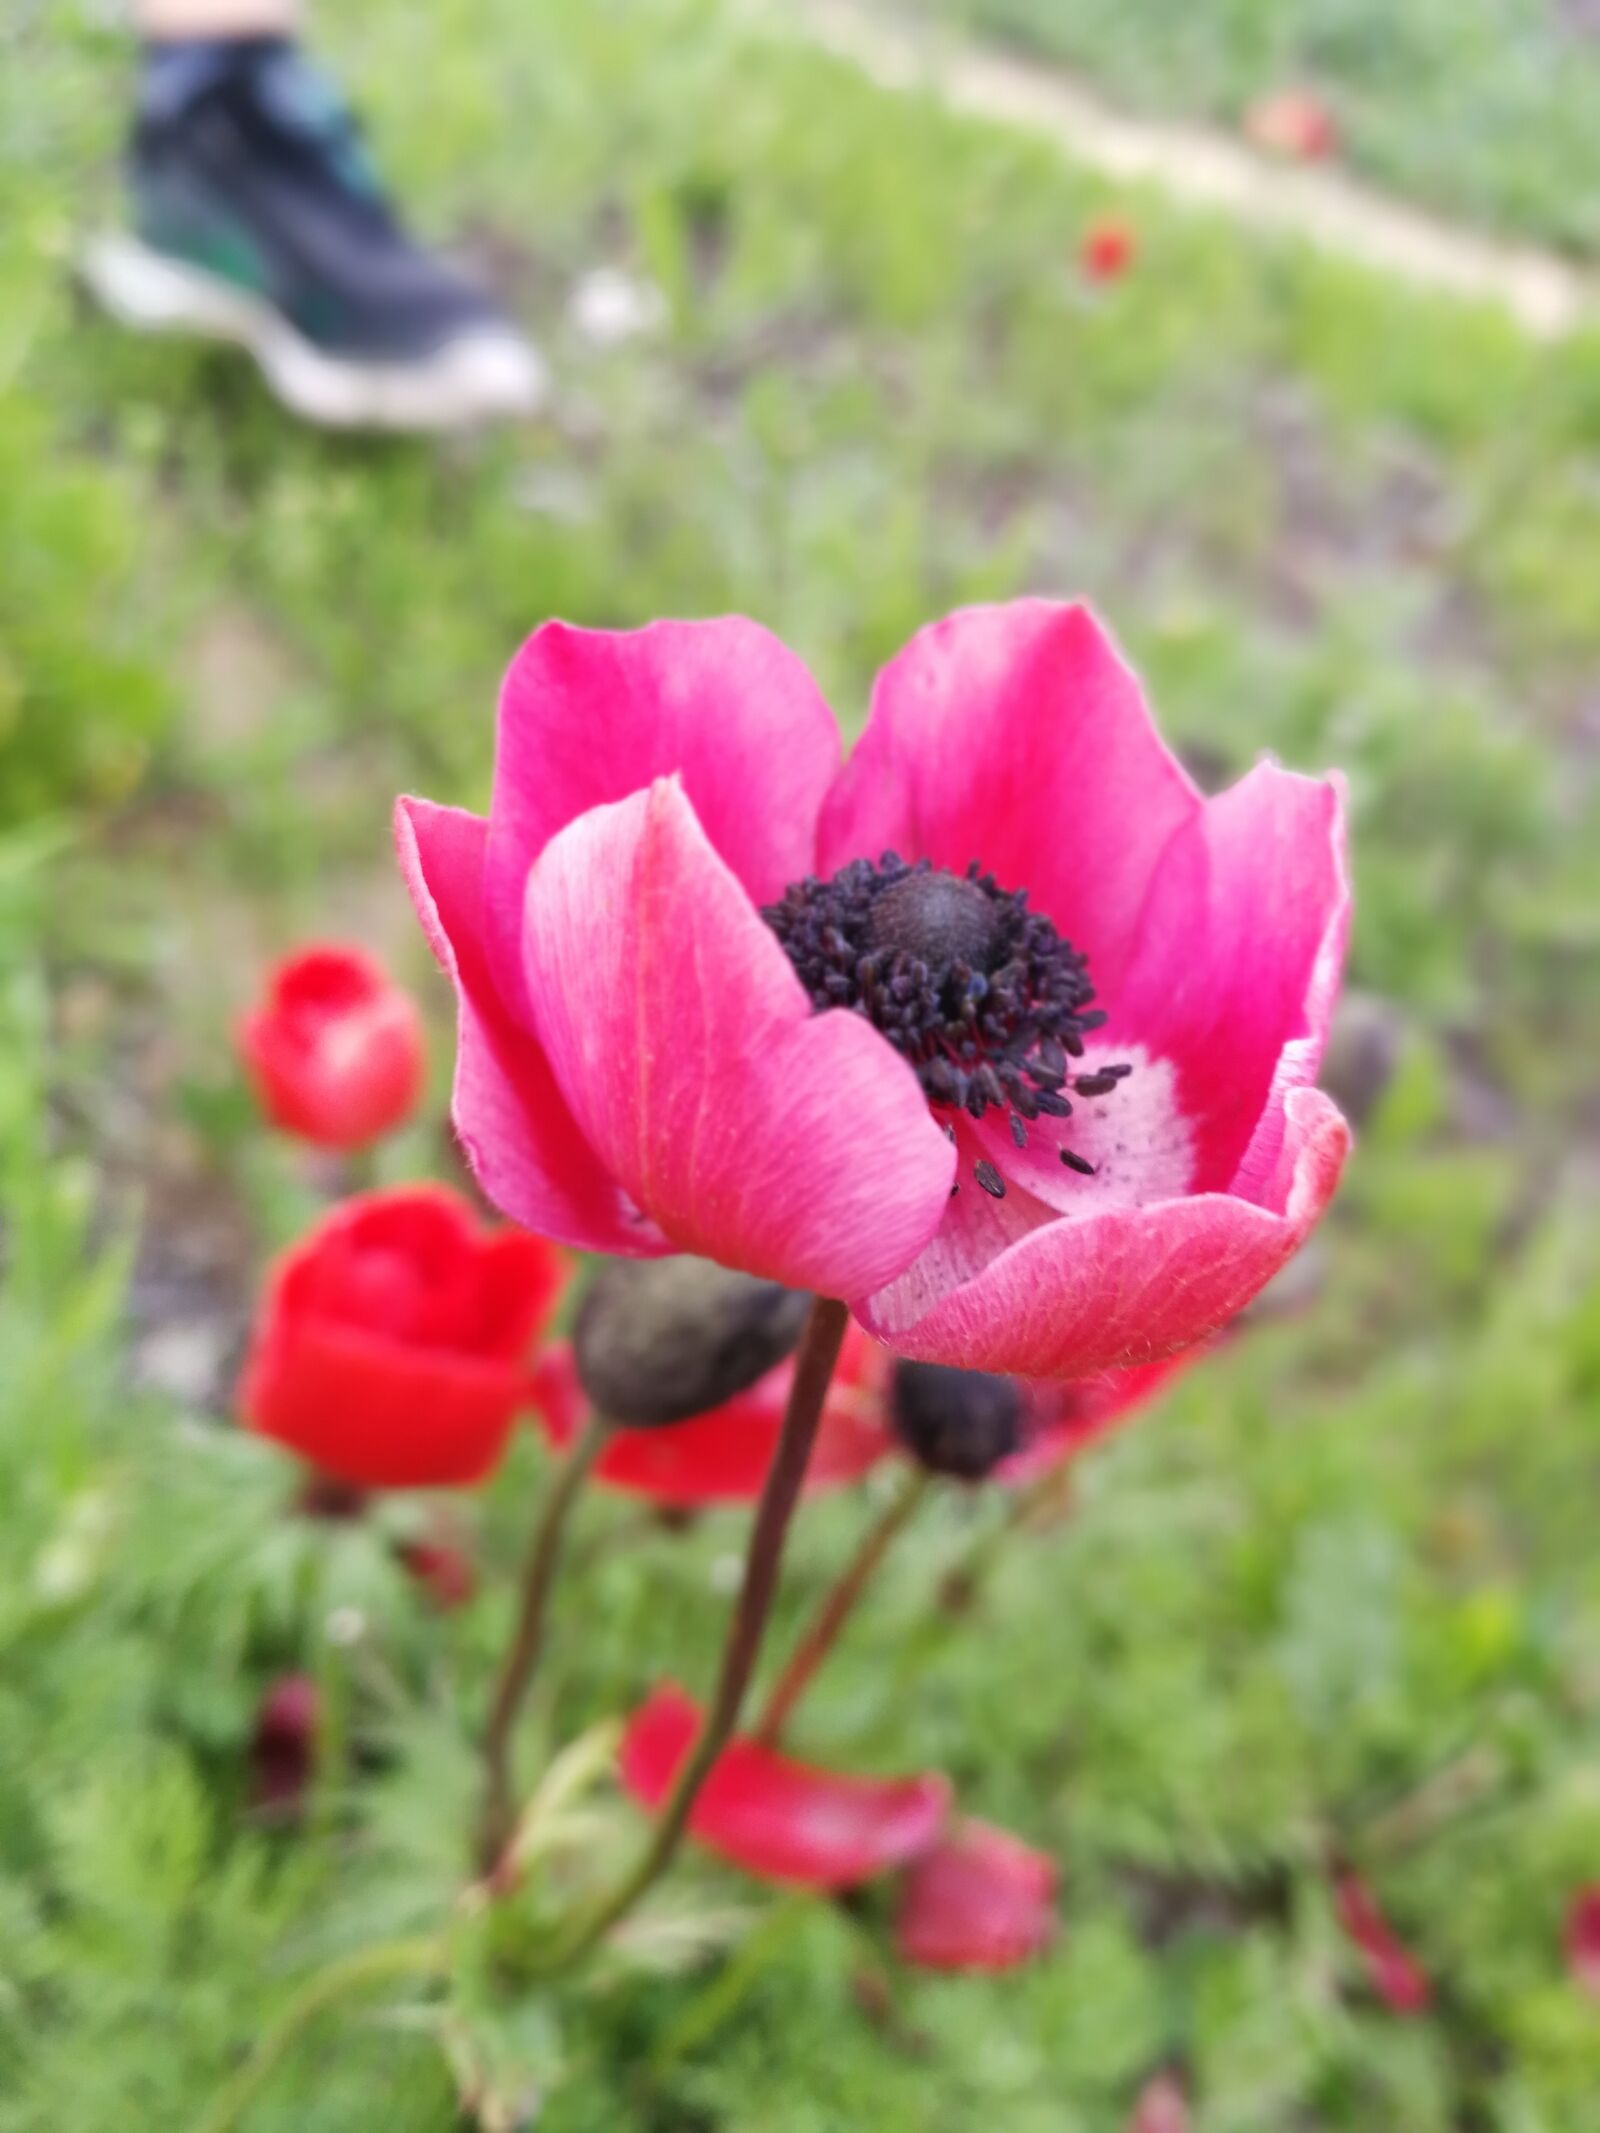 HUAWEI P10 sample photo. Flower, forest, nature photography